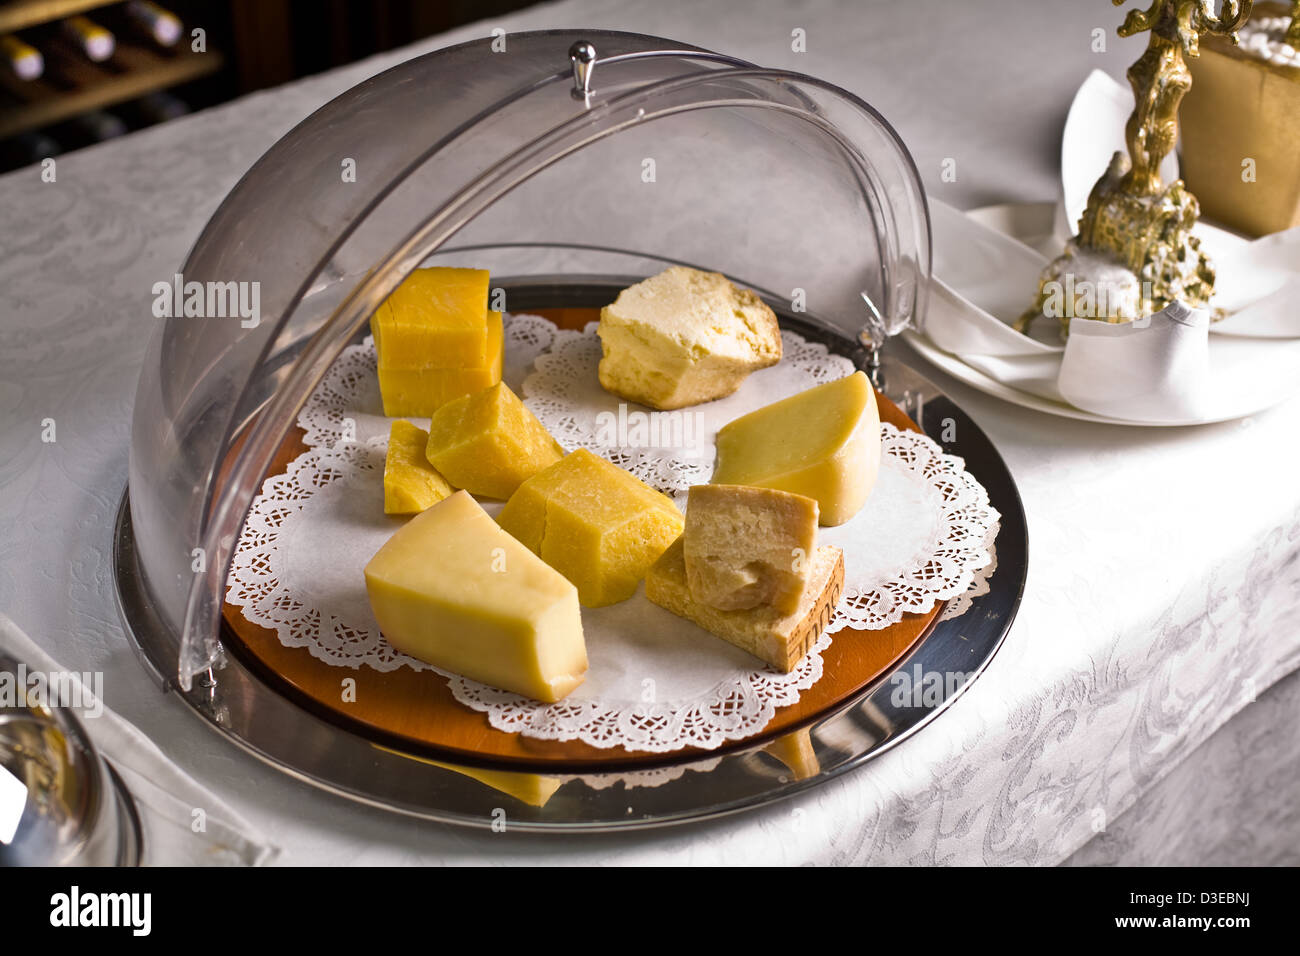 Variety of cheeses on the table the vintage restaurant. Stock Photo